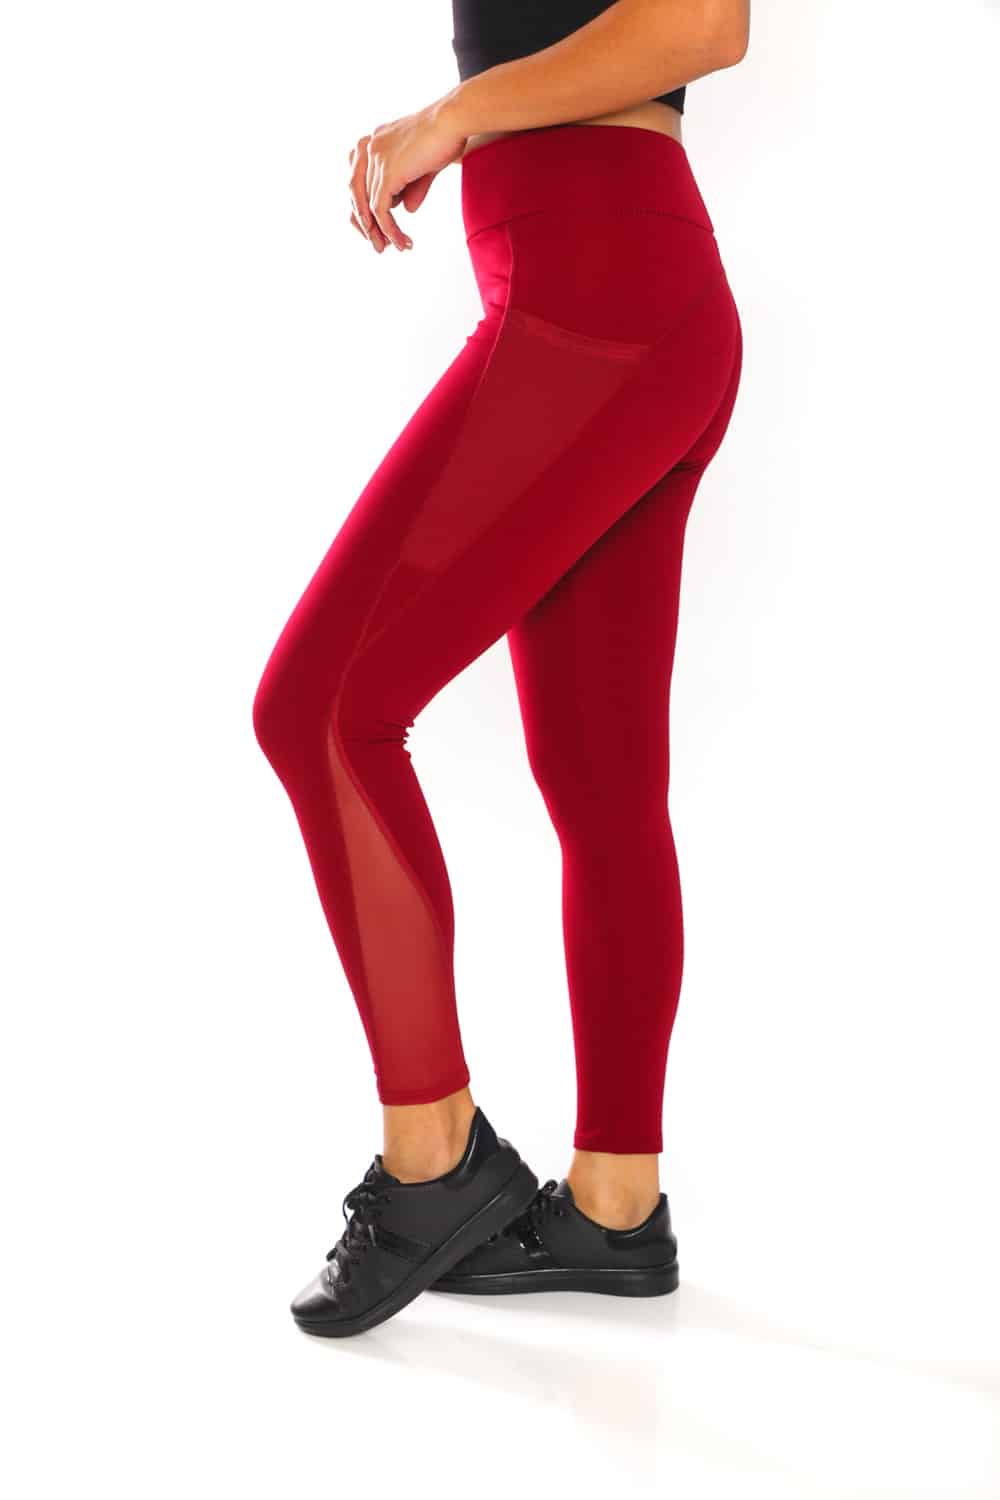 Solid Color 3 Inch High Waisted Burgundy Color Leggings with Side